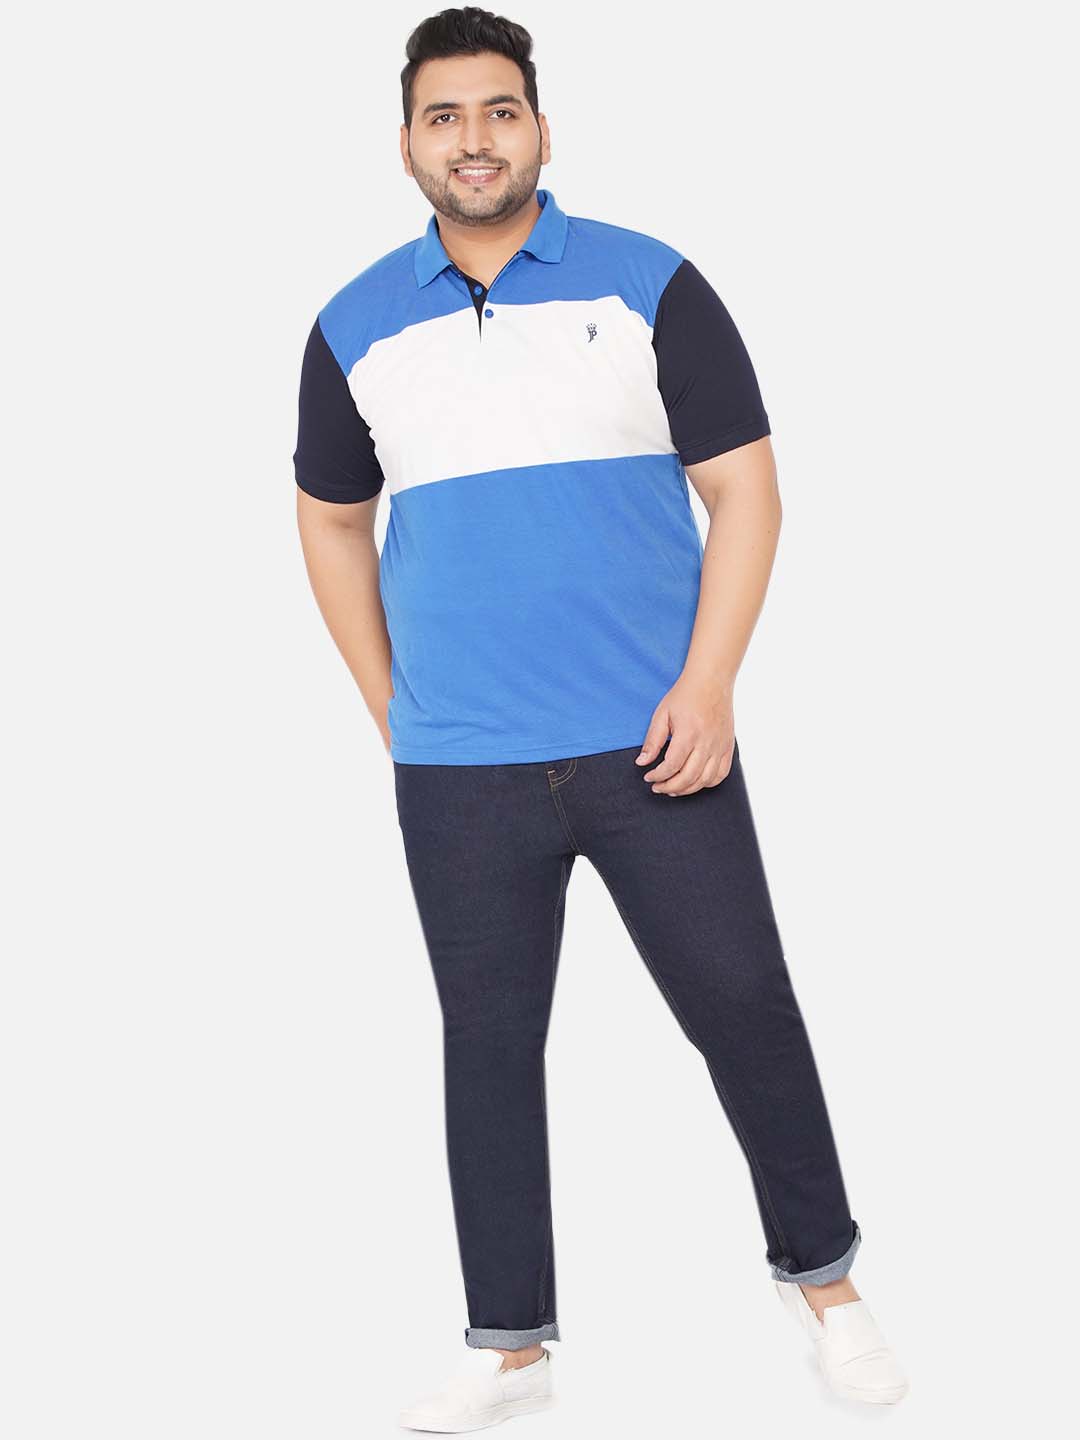 Wedgewood Blue Colorblocked Polo